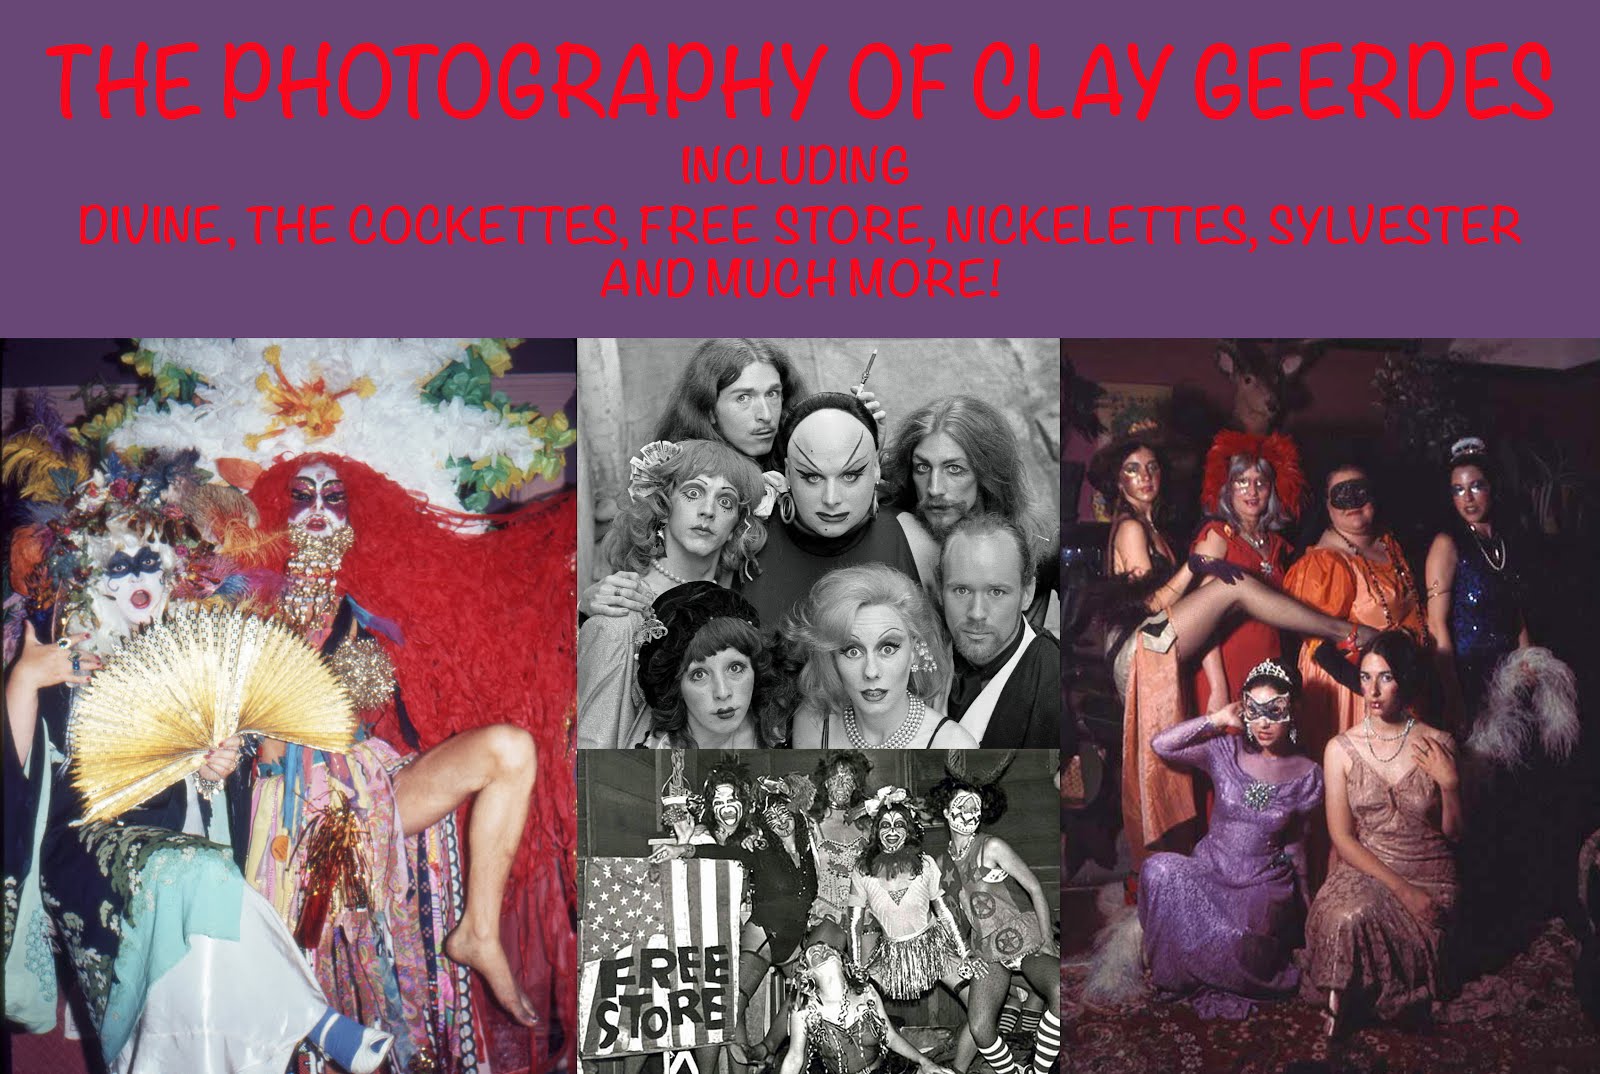 THE PHOTOGRAPHY OF CLAY GEERDES